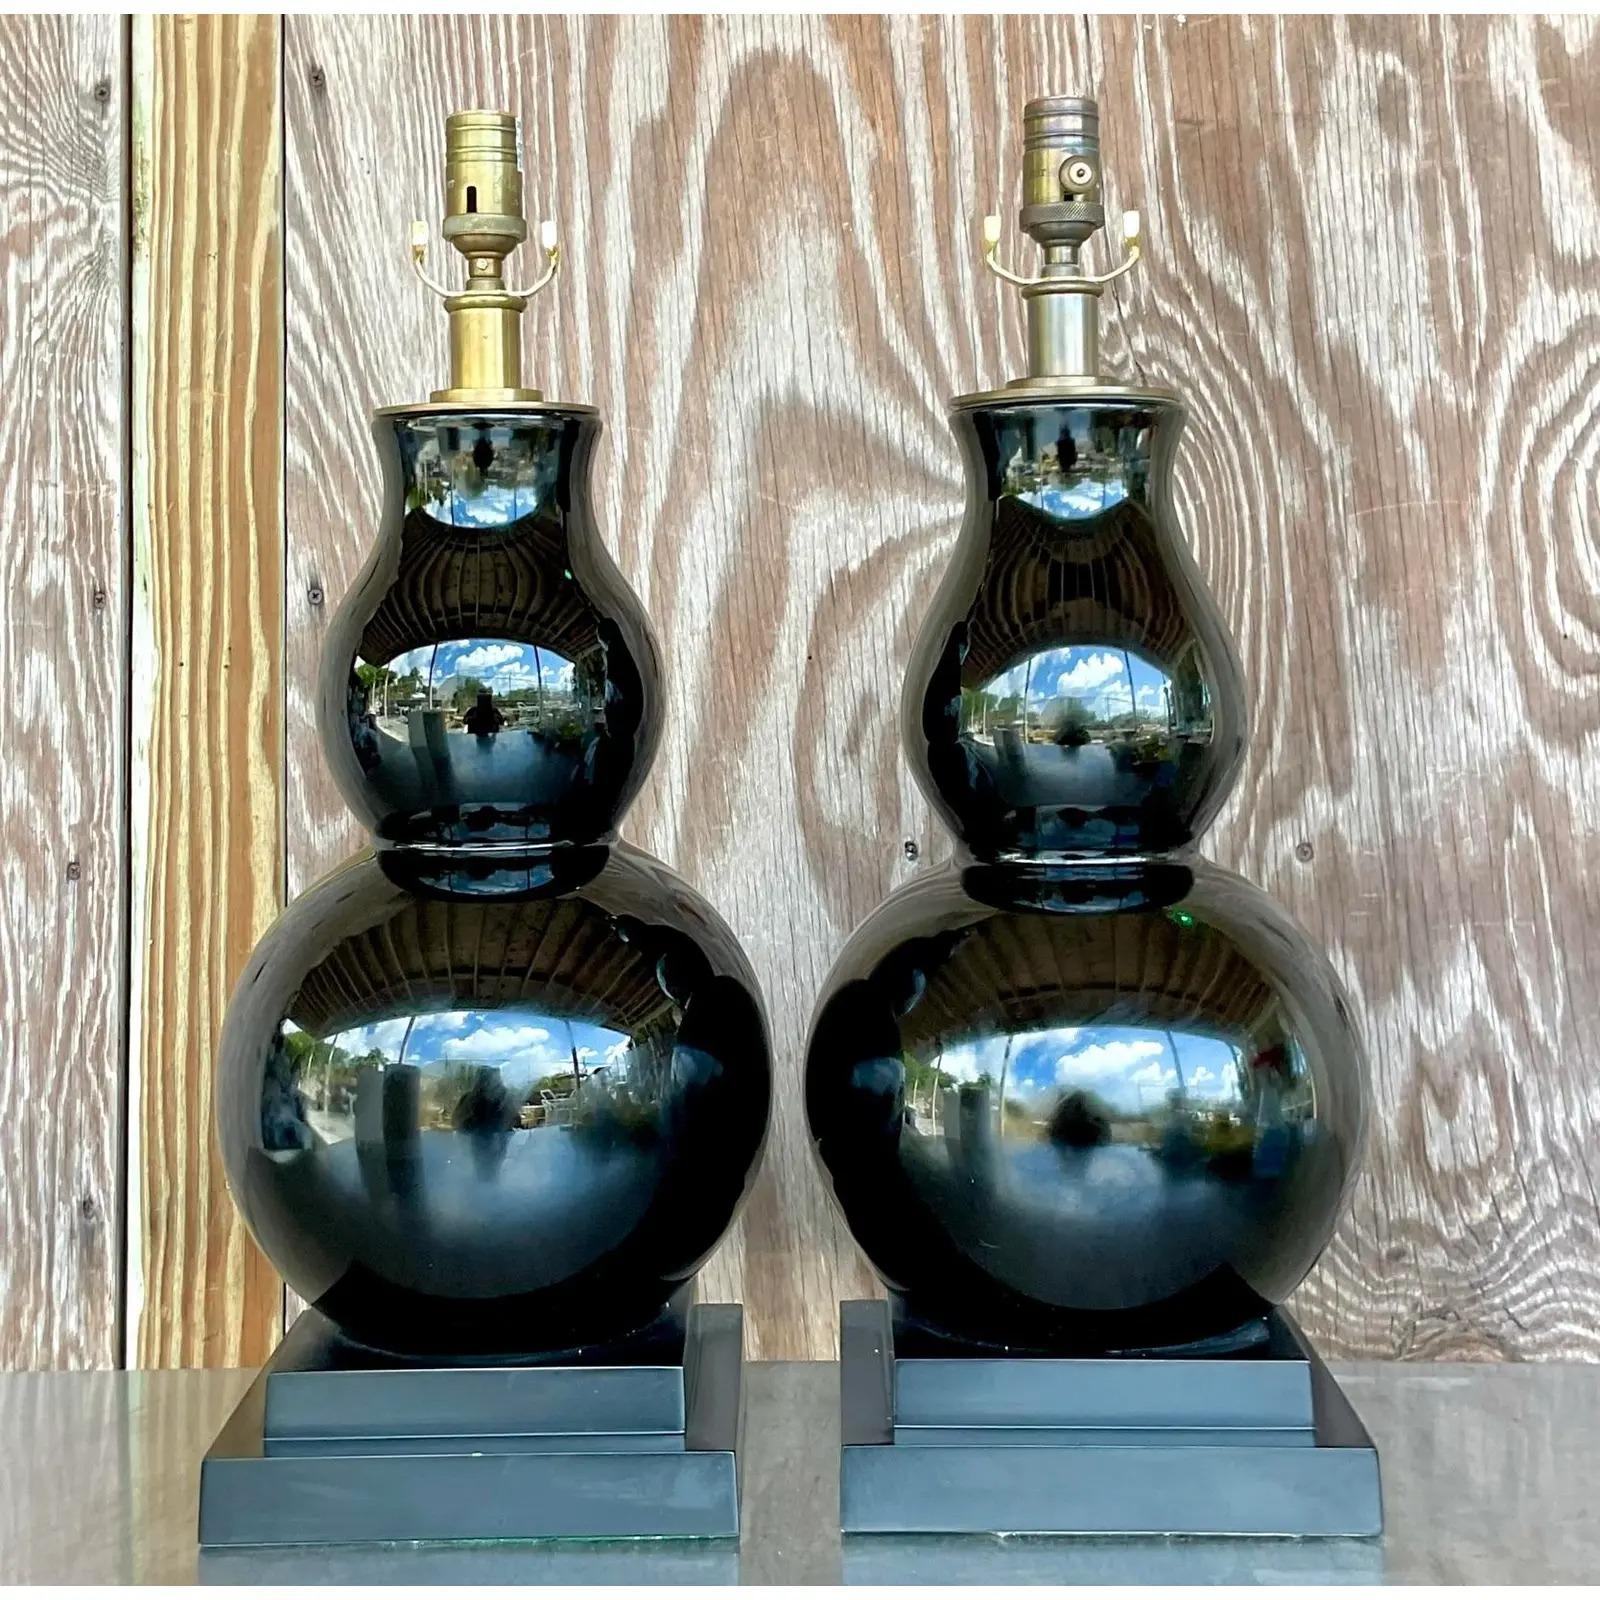 A fantastic pair of vintage Regency table lamps. Designed by Chapman and Myers for Visual Comfort. The “Fang” style with a classic gourd shape and brass hardware. Acquired from a Palm Beach estate.